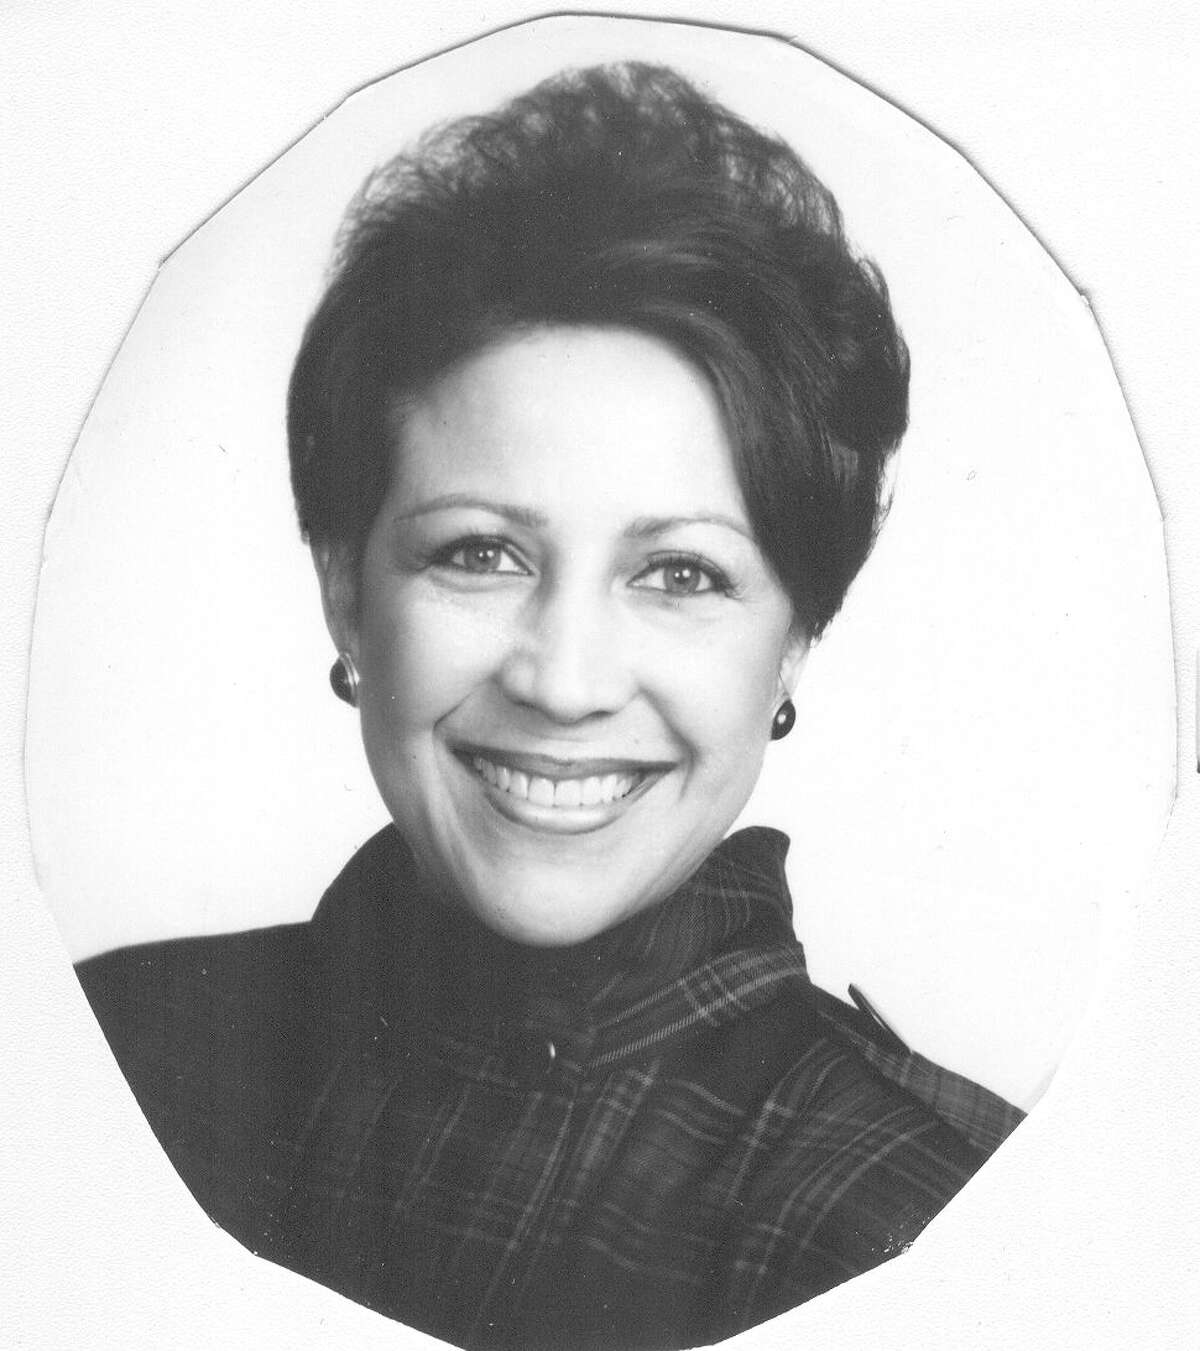 Aaronetta Pierce as she appeared in the early 1980s. In 1985, she became the first African American woman to serve on the Texas Commission on the Arts.